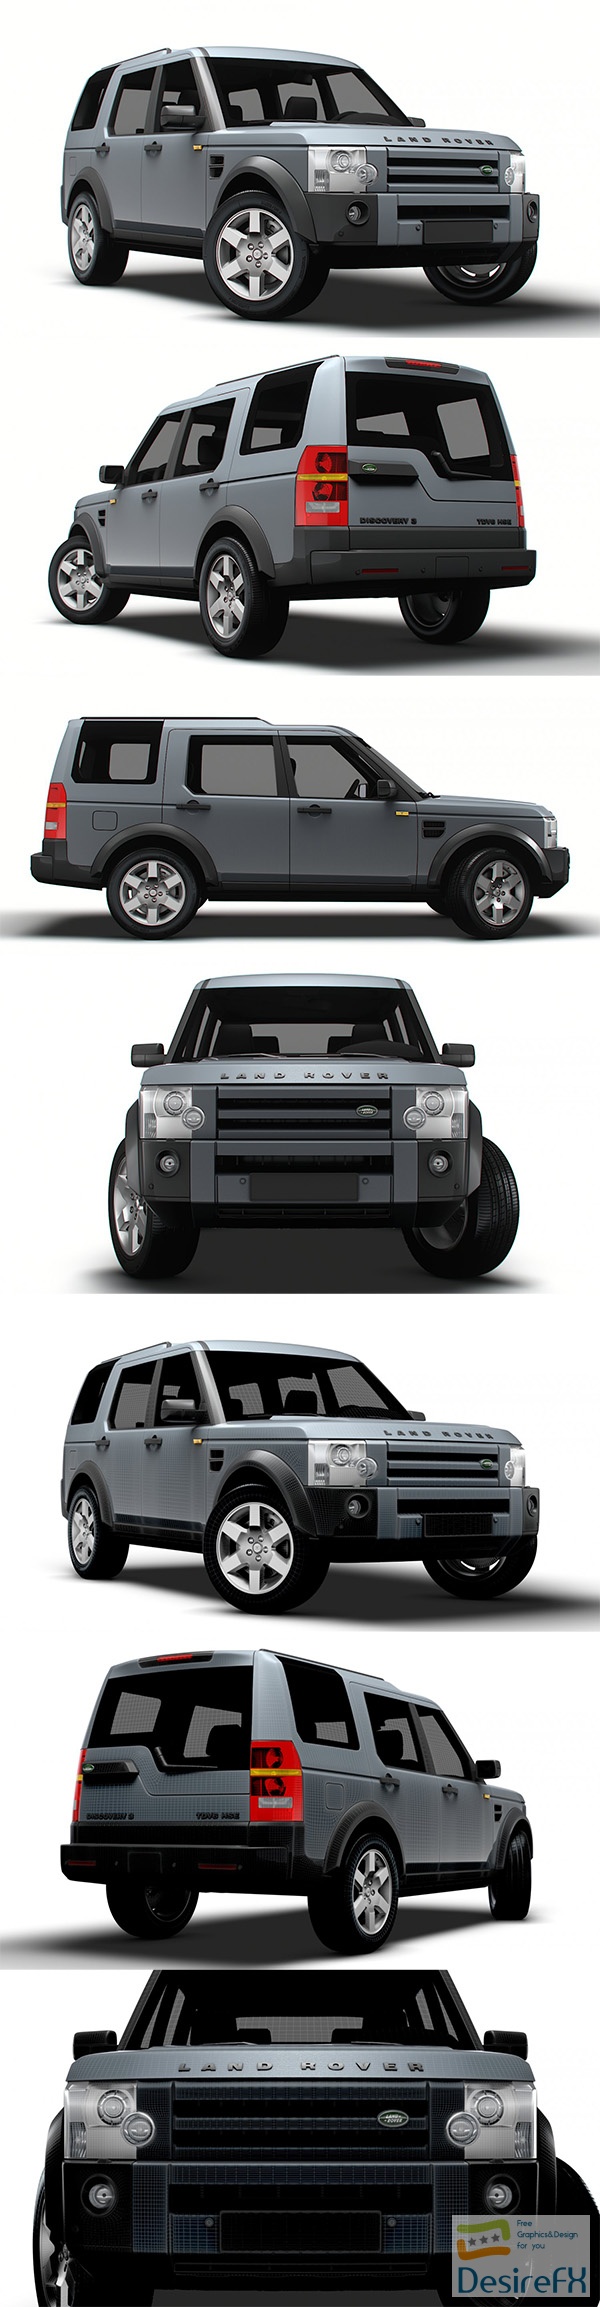 Land Rover Discovery 3 TdV6 HSE 2009 3D Model